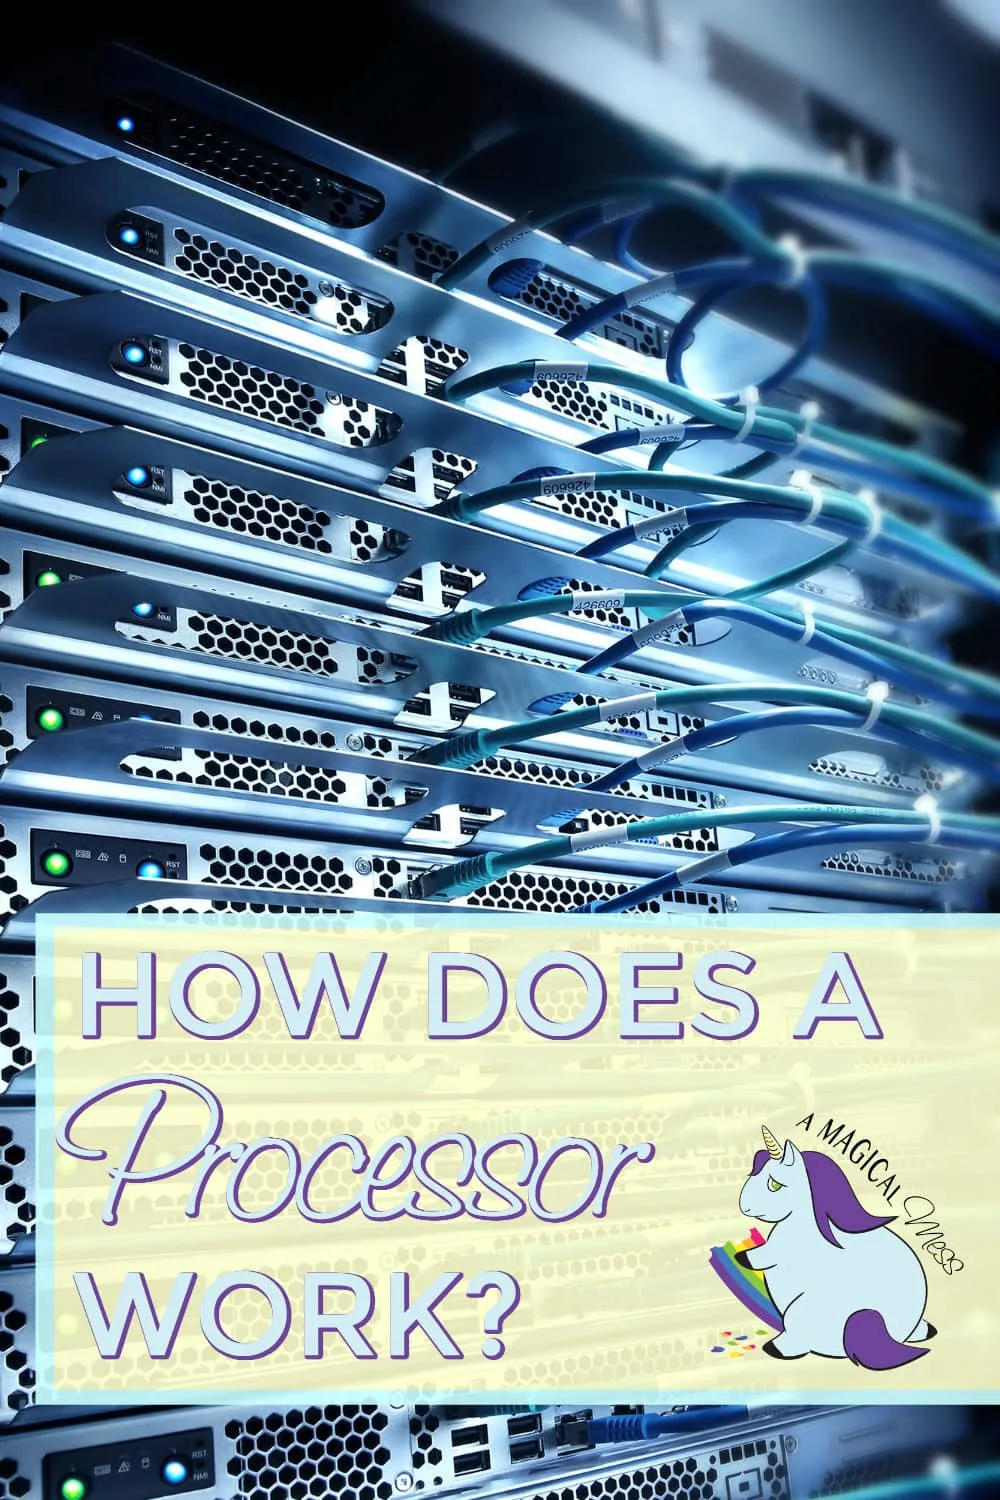 How to Choose the Best Intel Processor for your Needs